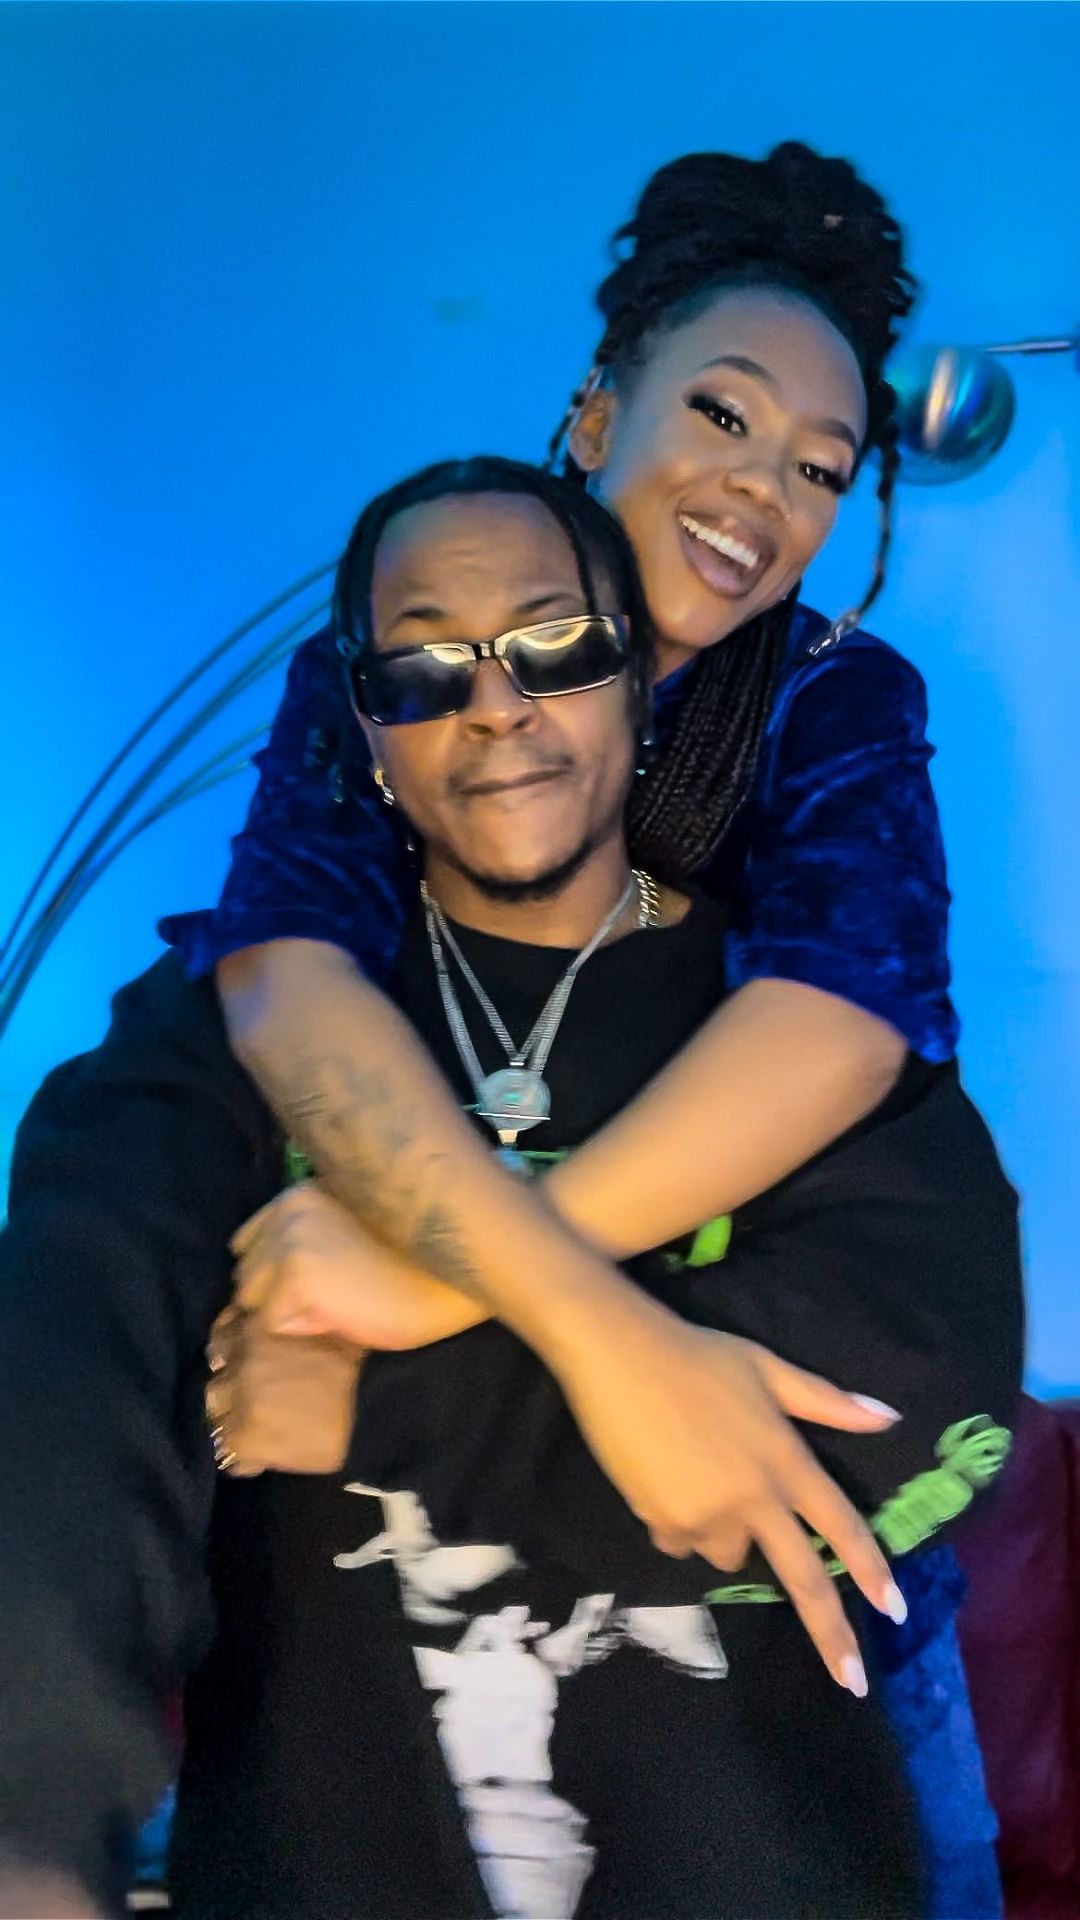 Bontle Modiselle and Priddy Ugly